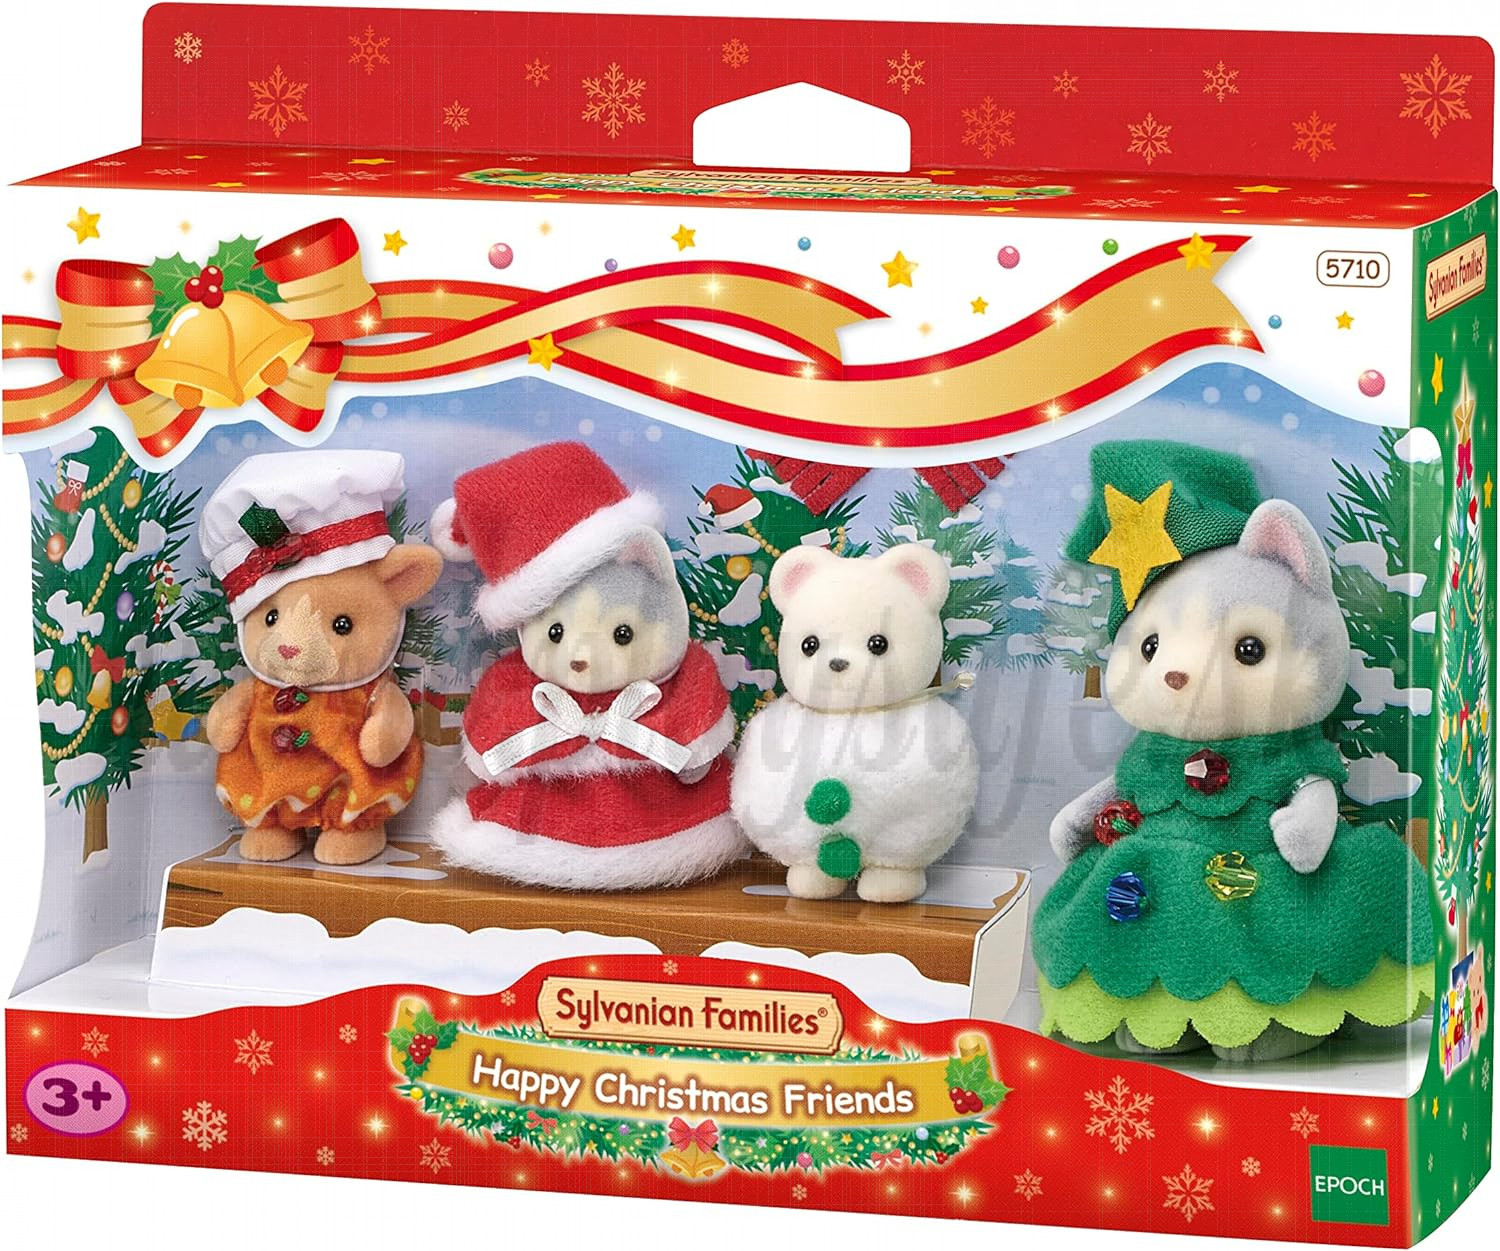 Sylvanian Families 5710 Christmas Friends Limited Edition